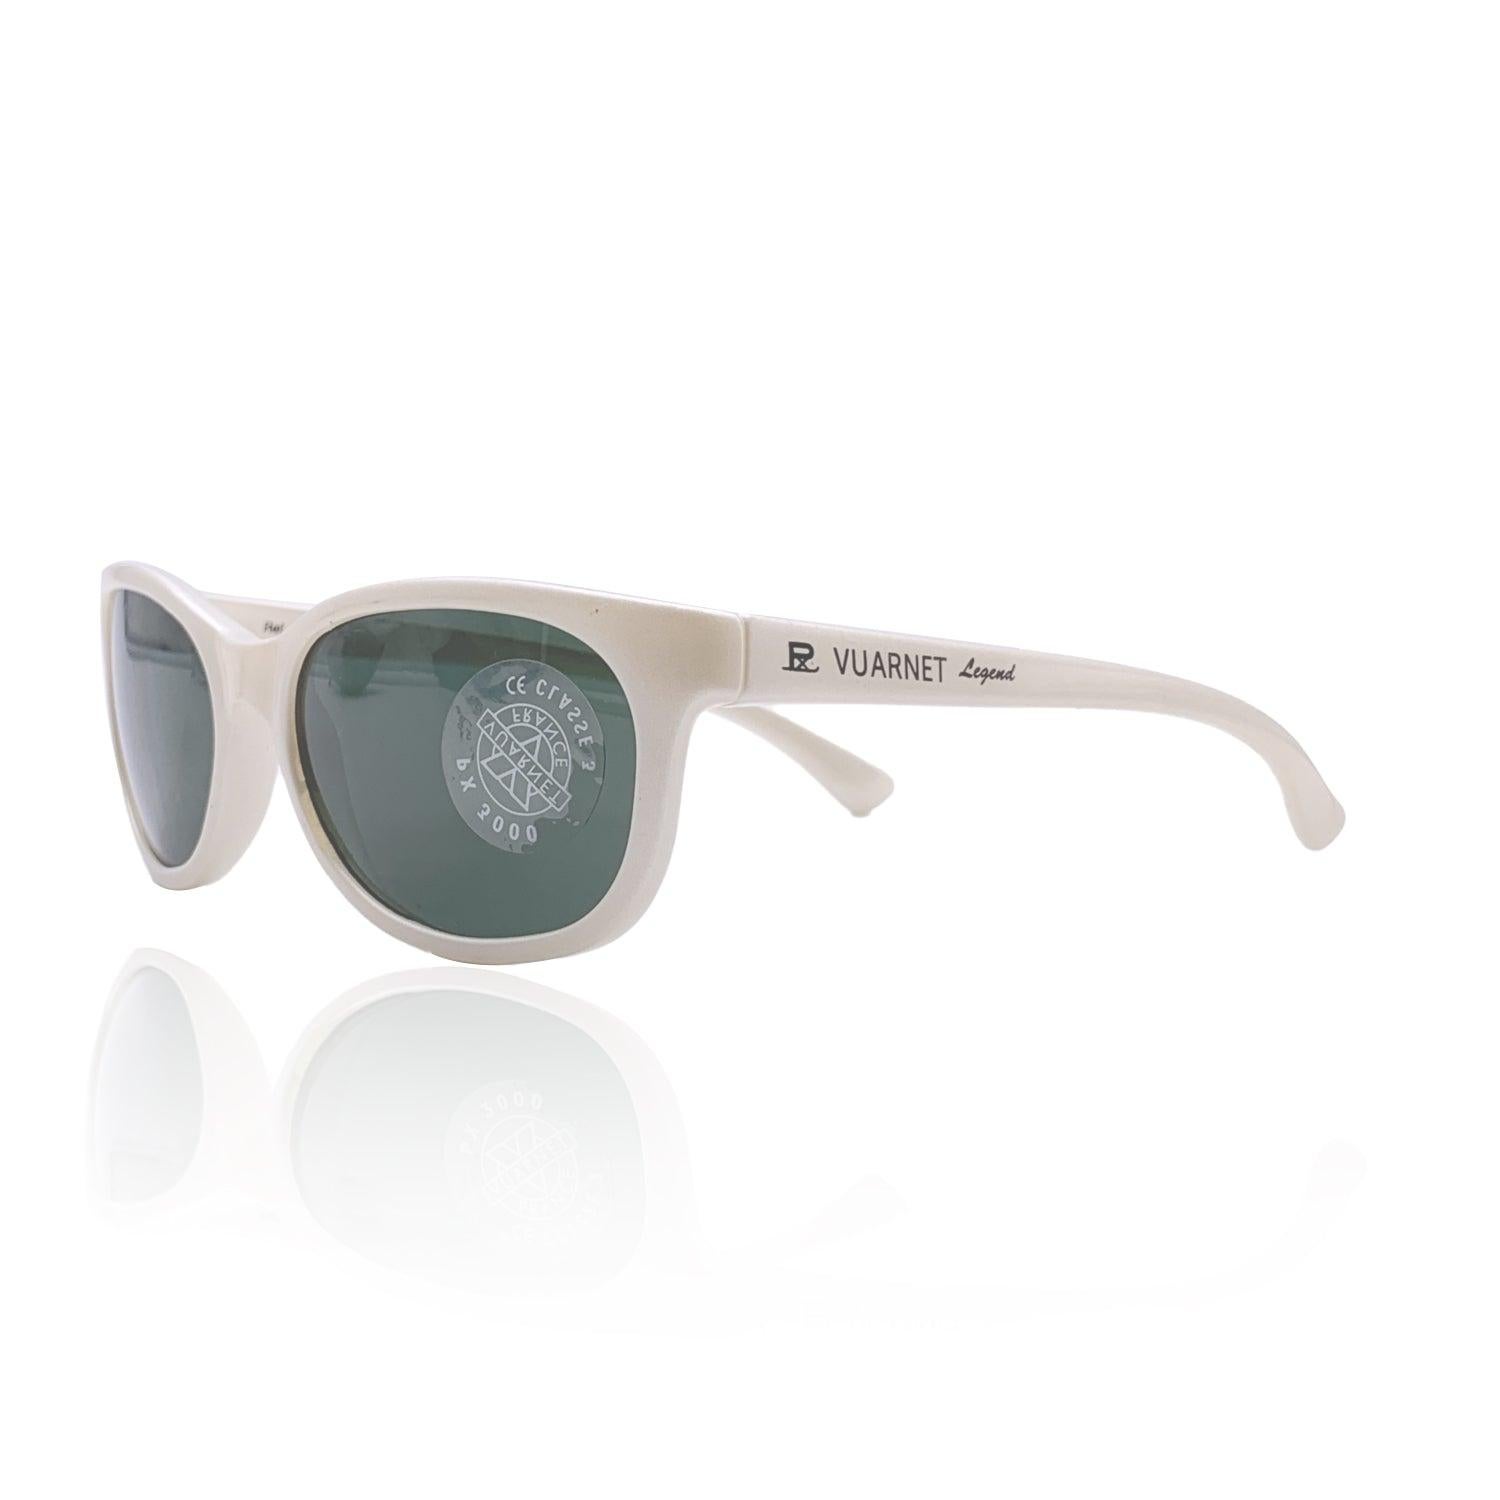 Vuarnet Legend Vintage Sunglasses, Model 112. Oval white plastic frame with PX 2000 mineral lenses in green color. Made in France Details MATERIAL: Acetate COLOR: White MODEL: 112 GENDER: Unisex Adults COUNTRY OF MANUFACTURE: France ORIGINAL CASE?: